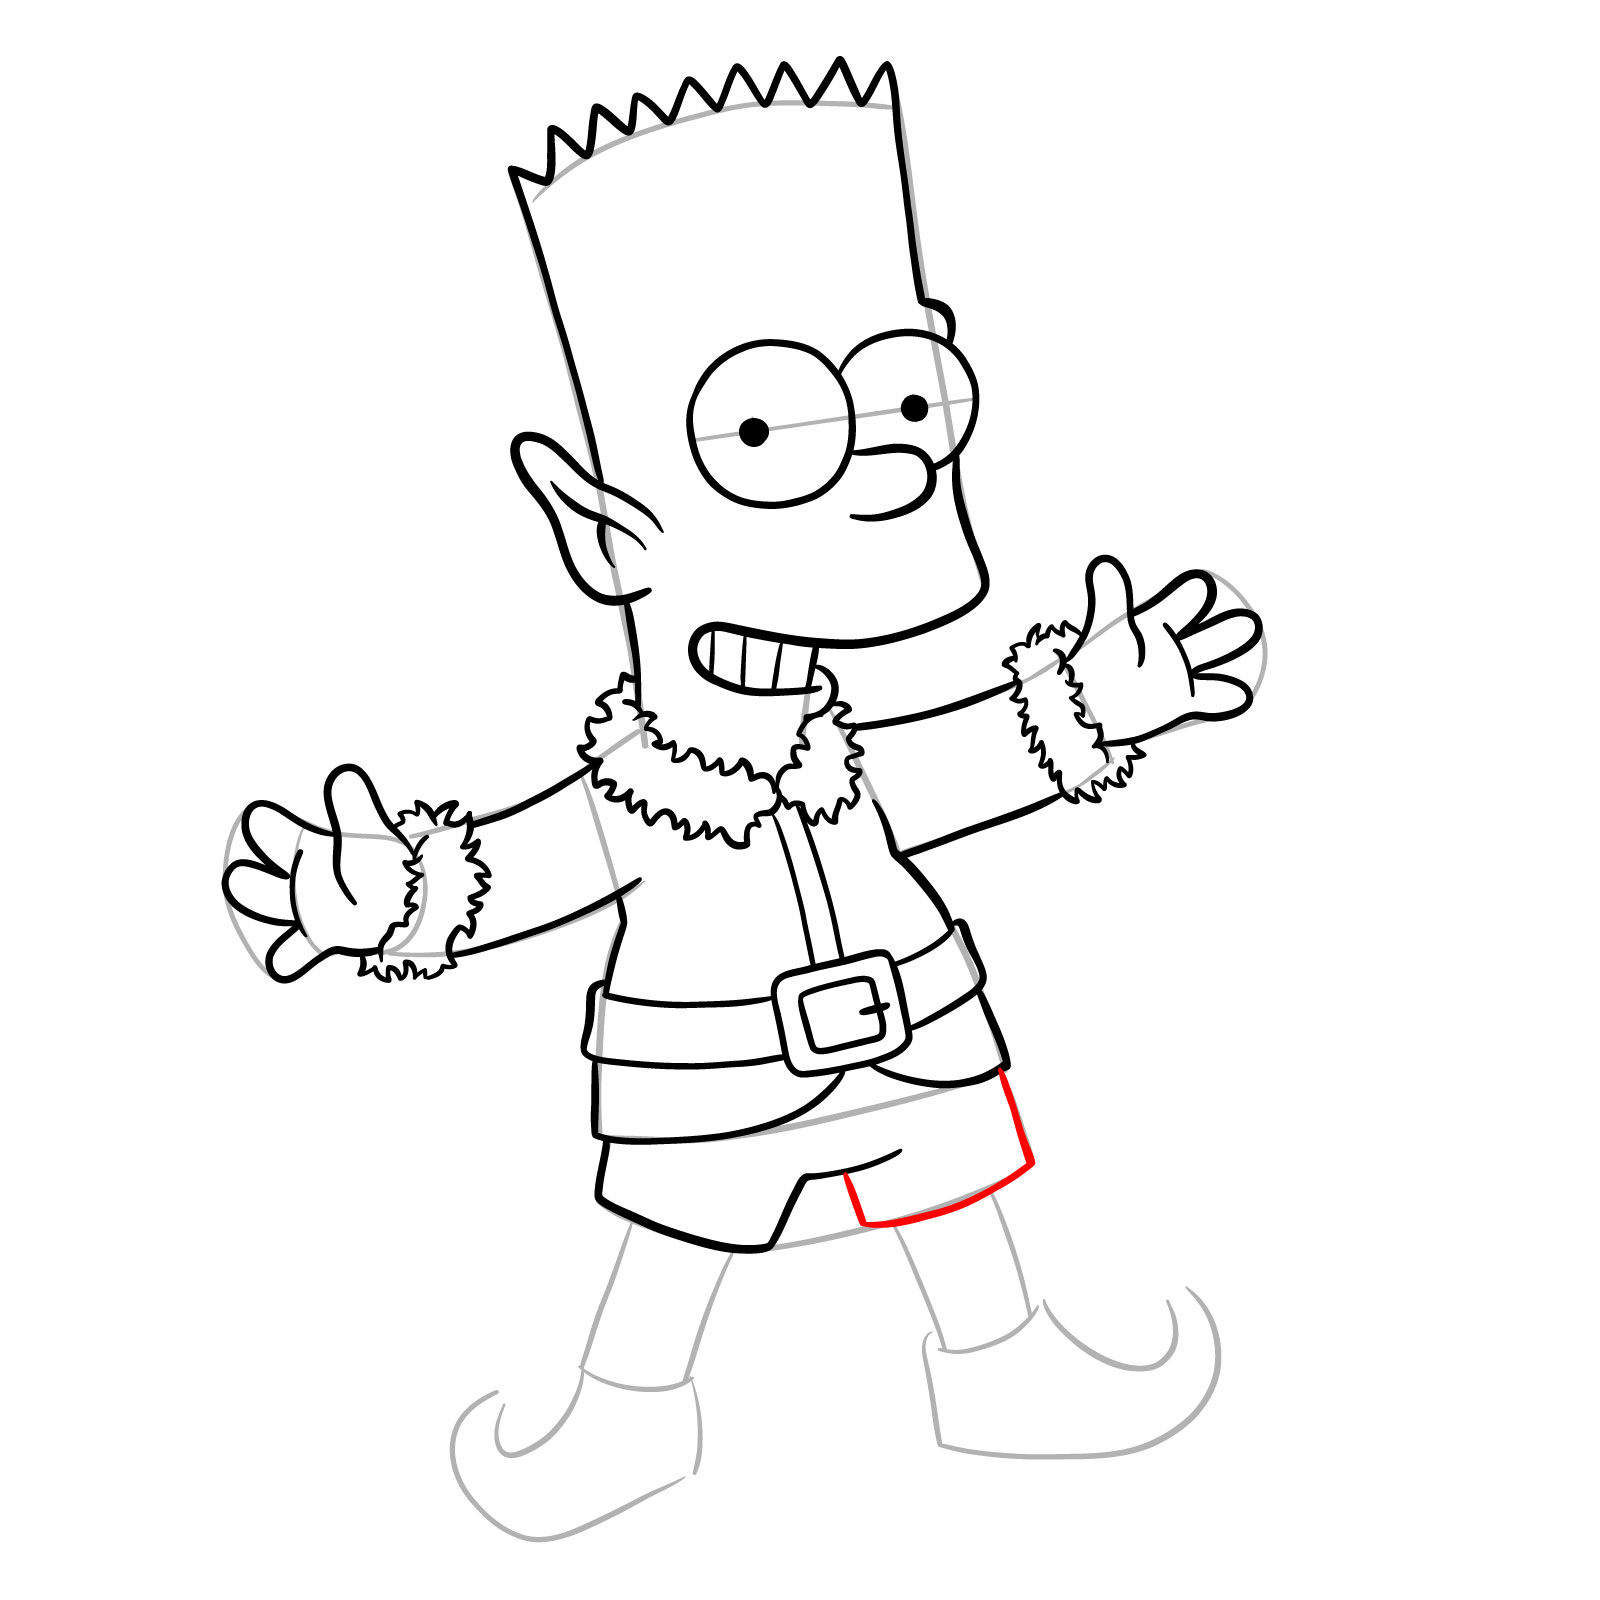 How to draw Bart Simpson as a Christmas Elf - step 25